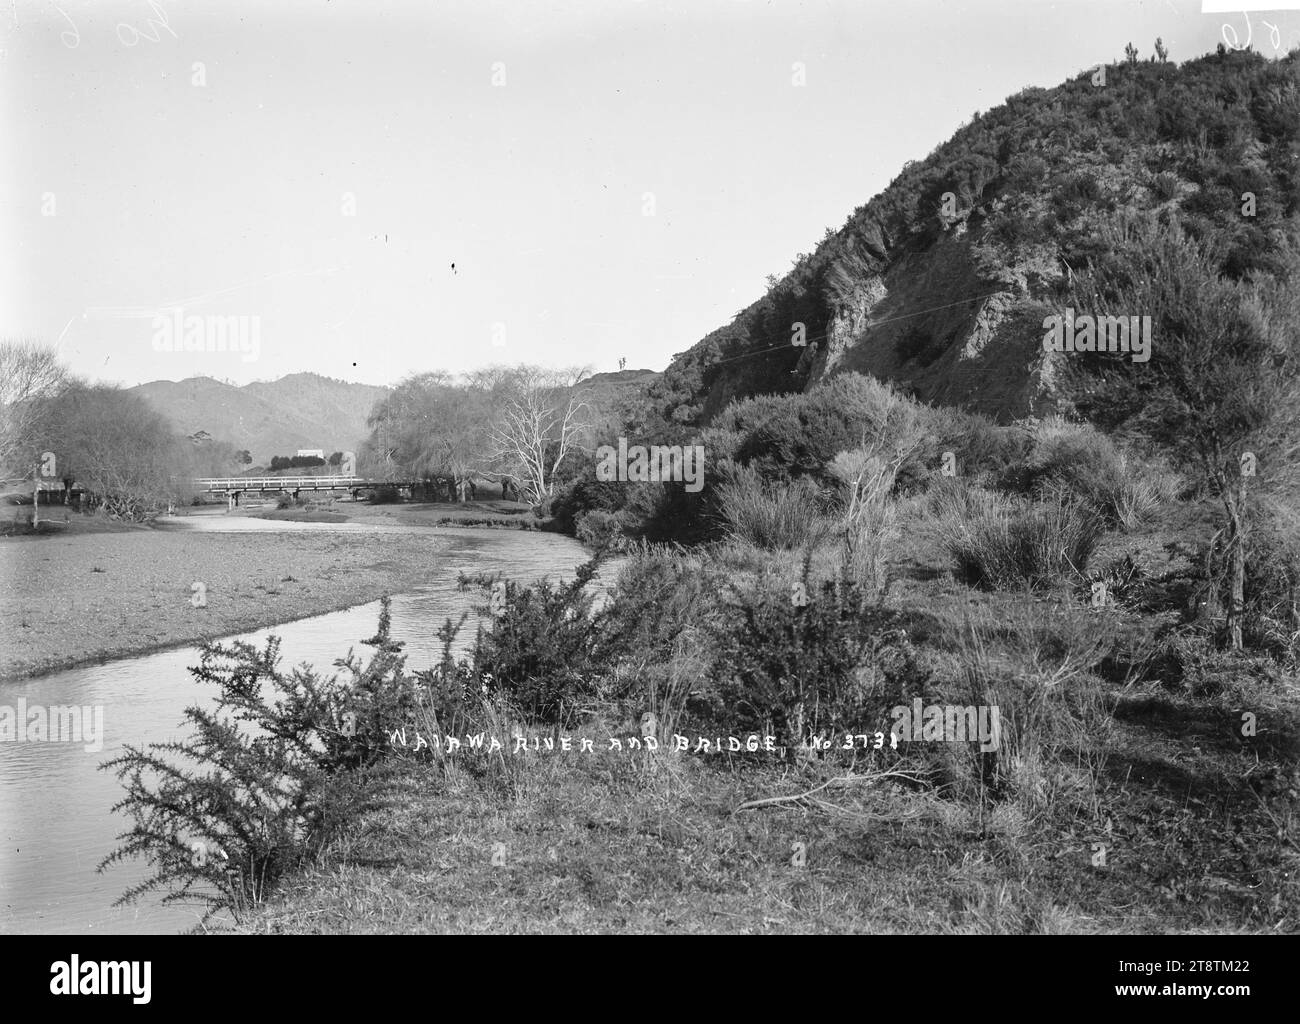 Waiaua River and bridge, Bay of Plenty, View of the river with the road bridge in the middle distance in early 1900s Stock Photo